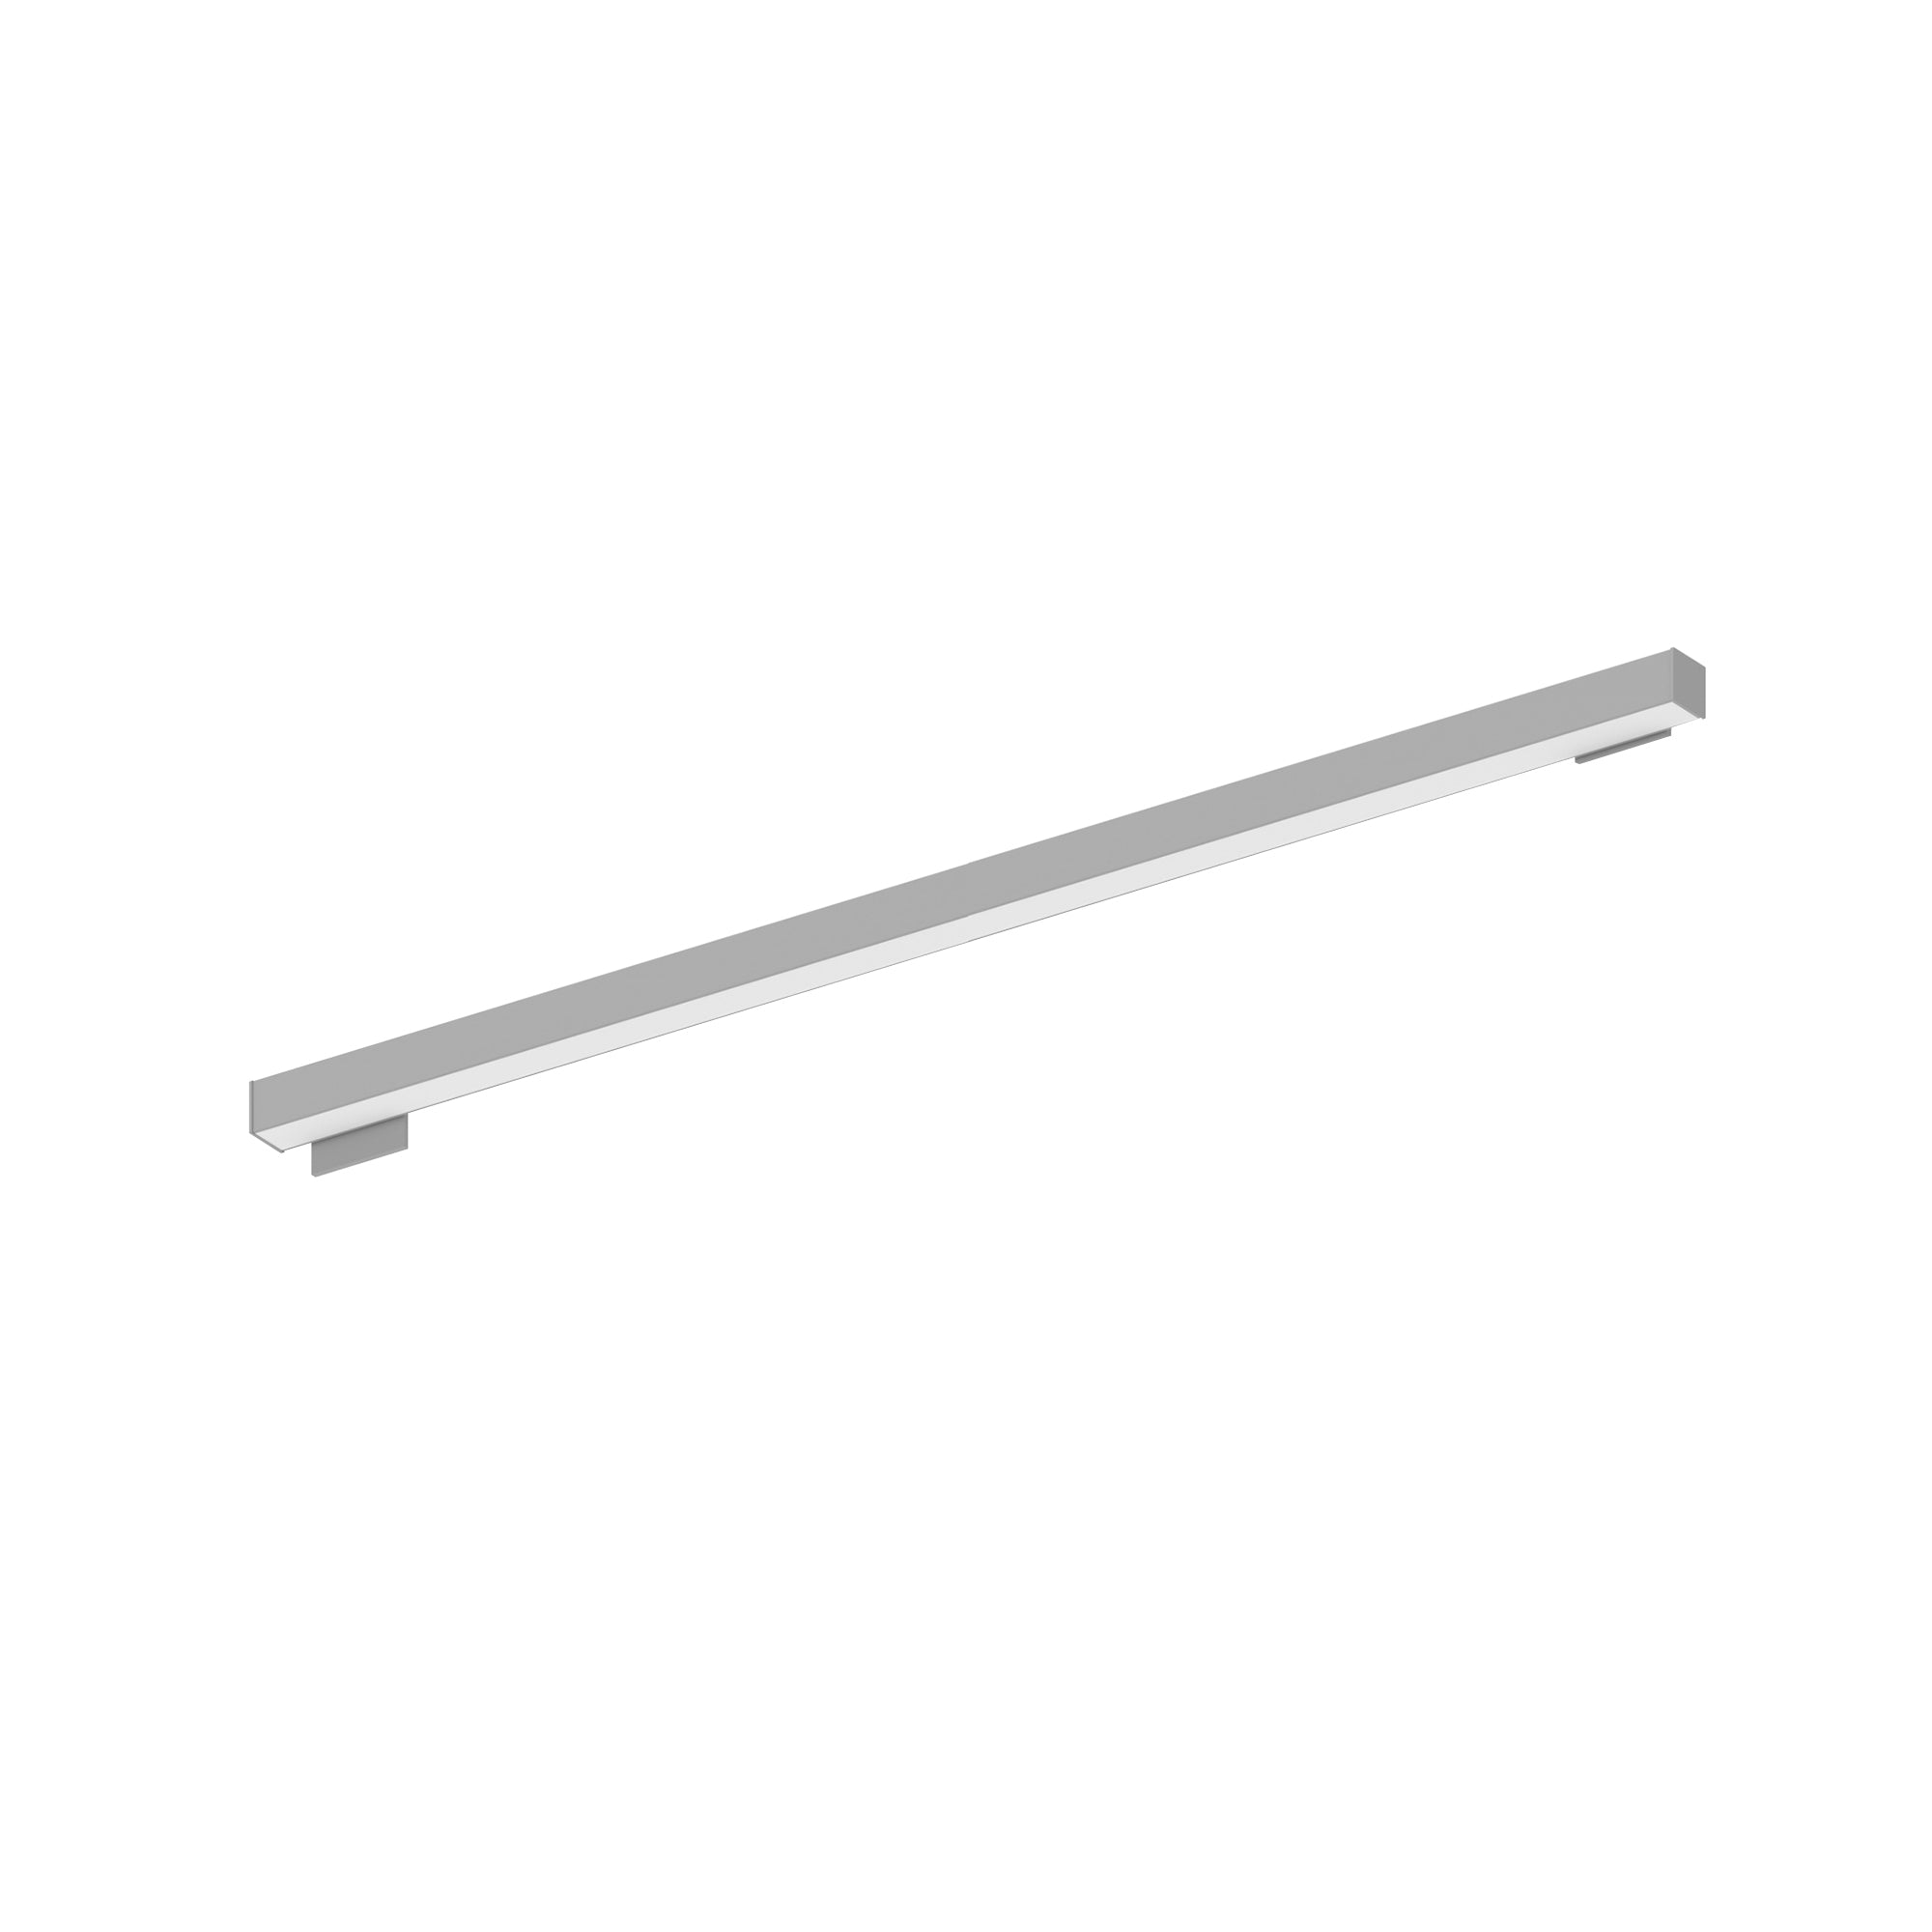 Nora Lighting NWLIN-81035A/L4-R2P - Linear - 8' L-Line LED Wall Mount Linear, 8400lm / 3500K, 4 Inchx4 Inch Left Plate & 2 Inchx4 Inch Right Plate, Right Power Feed, Aluminum Finish